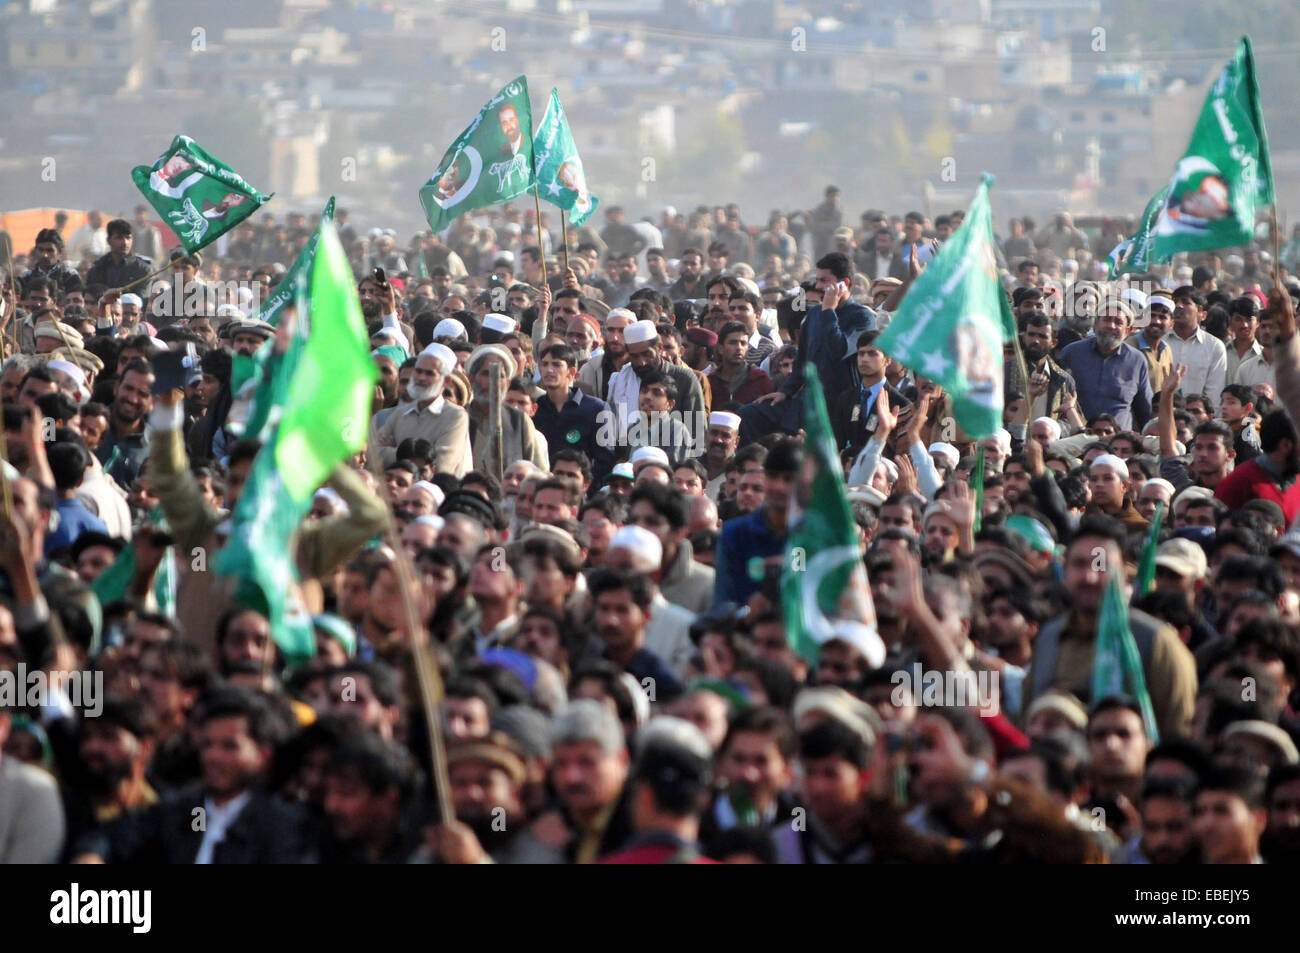 Havelian. 29th Nov, 2014. Supporters of ruling party Pakistan Muslim League-Nawaz (PML-N) gathered during a public meeting in northwest Pakistan's Havelian on Nov. 29, 2014. Pakistani Prime Minister Nawaz Sharif addressing a huge public meeting at Havelian on Saturday said that the multi-dimensional projects being undertaken by PML-N government would make Pakistan an Asian tiger. Credit:  Ahmad Kamal/Xinhua/Alamy Live News Stock Photo